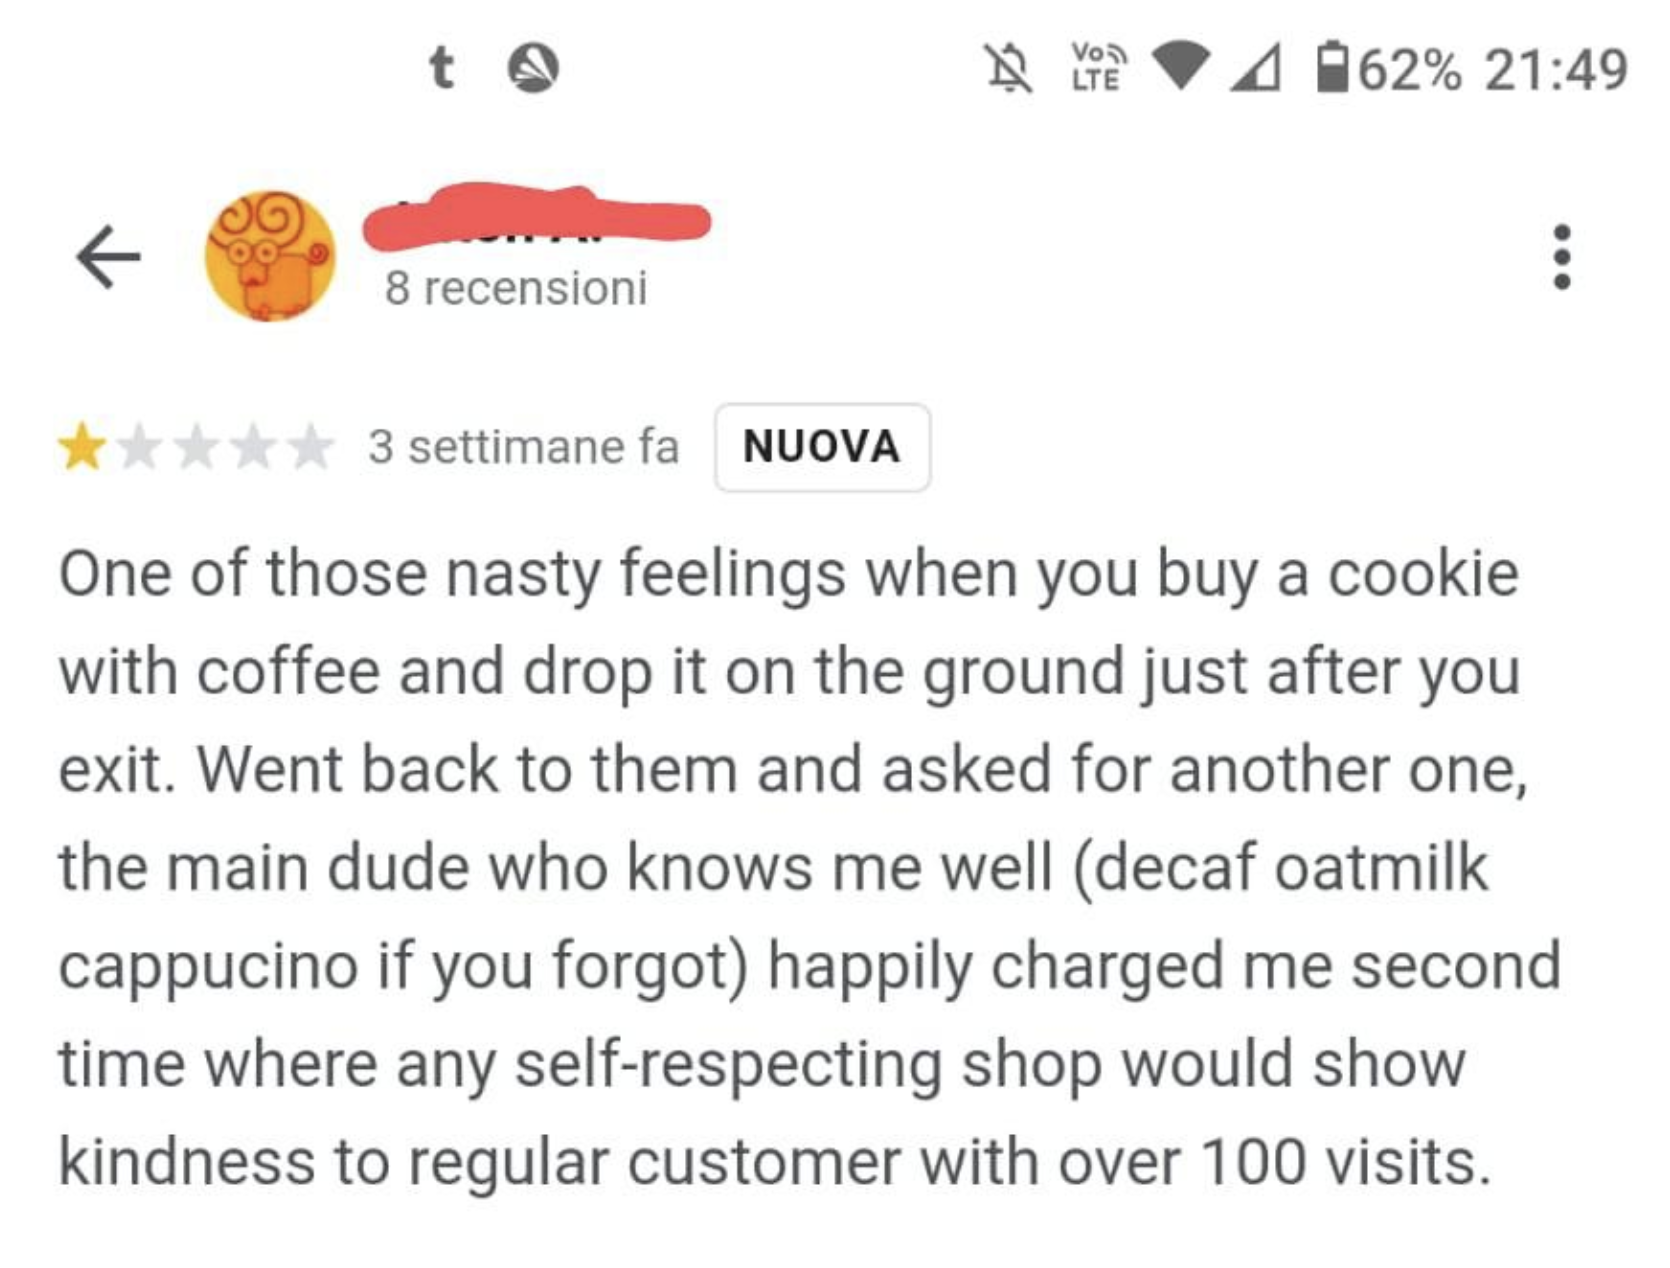 A customer complaining that they had to pay for another cookie because they dropped theirs